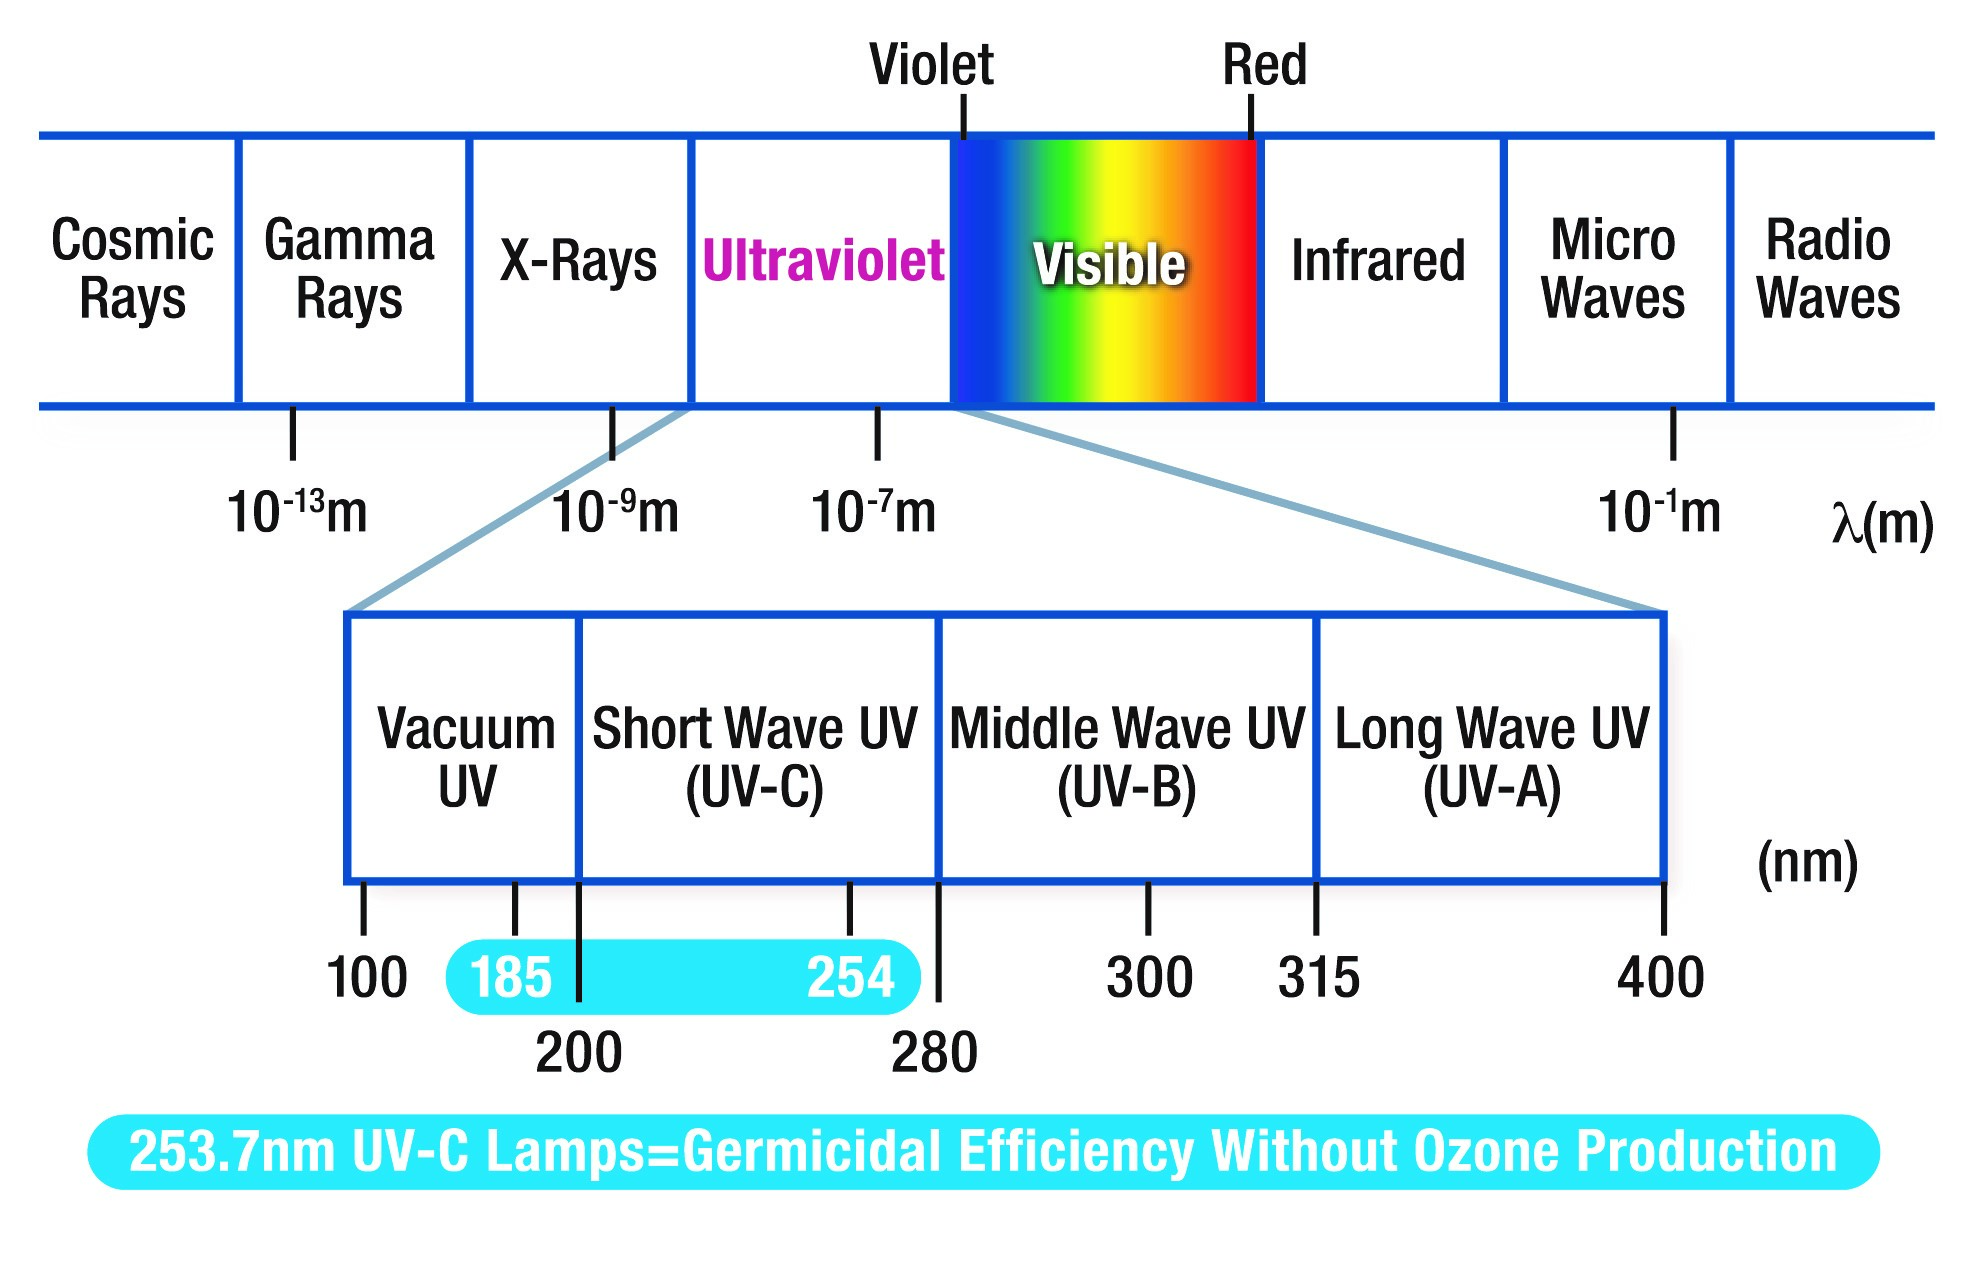 The 253.7 nm UV-C wavelength used by most industrial-grade germicidal fixtures does not produce ozone.